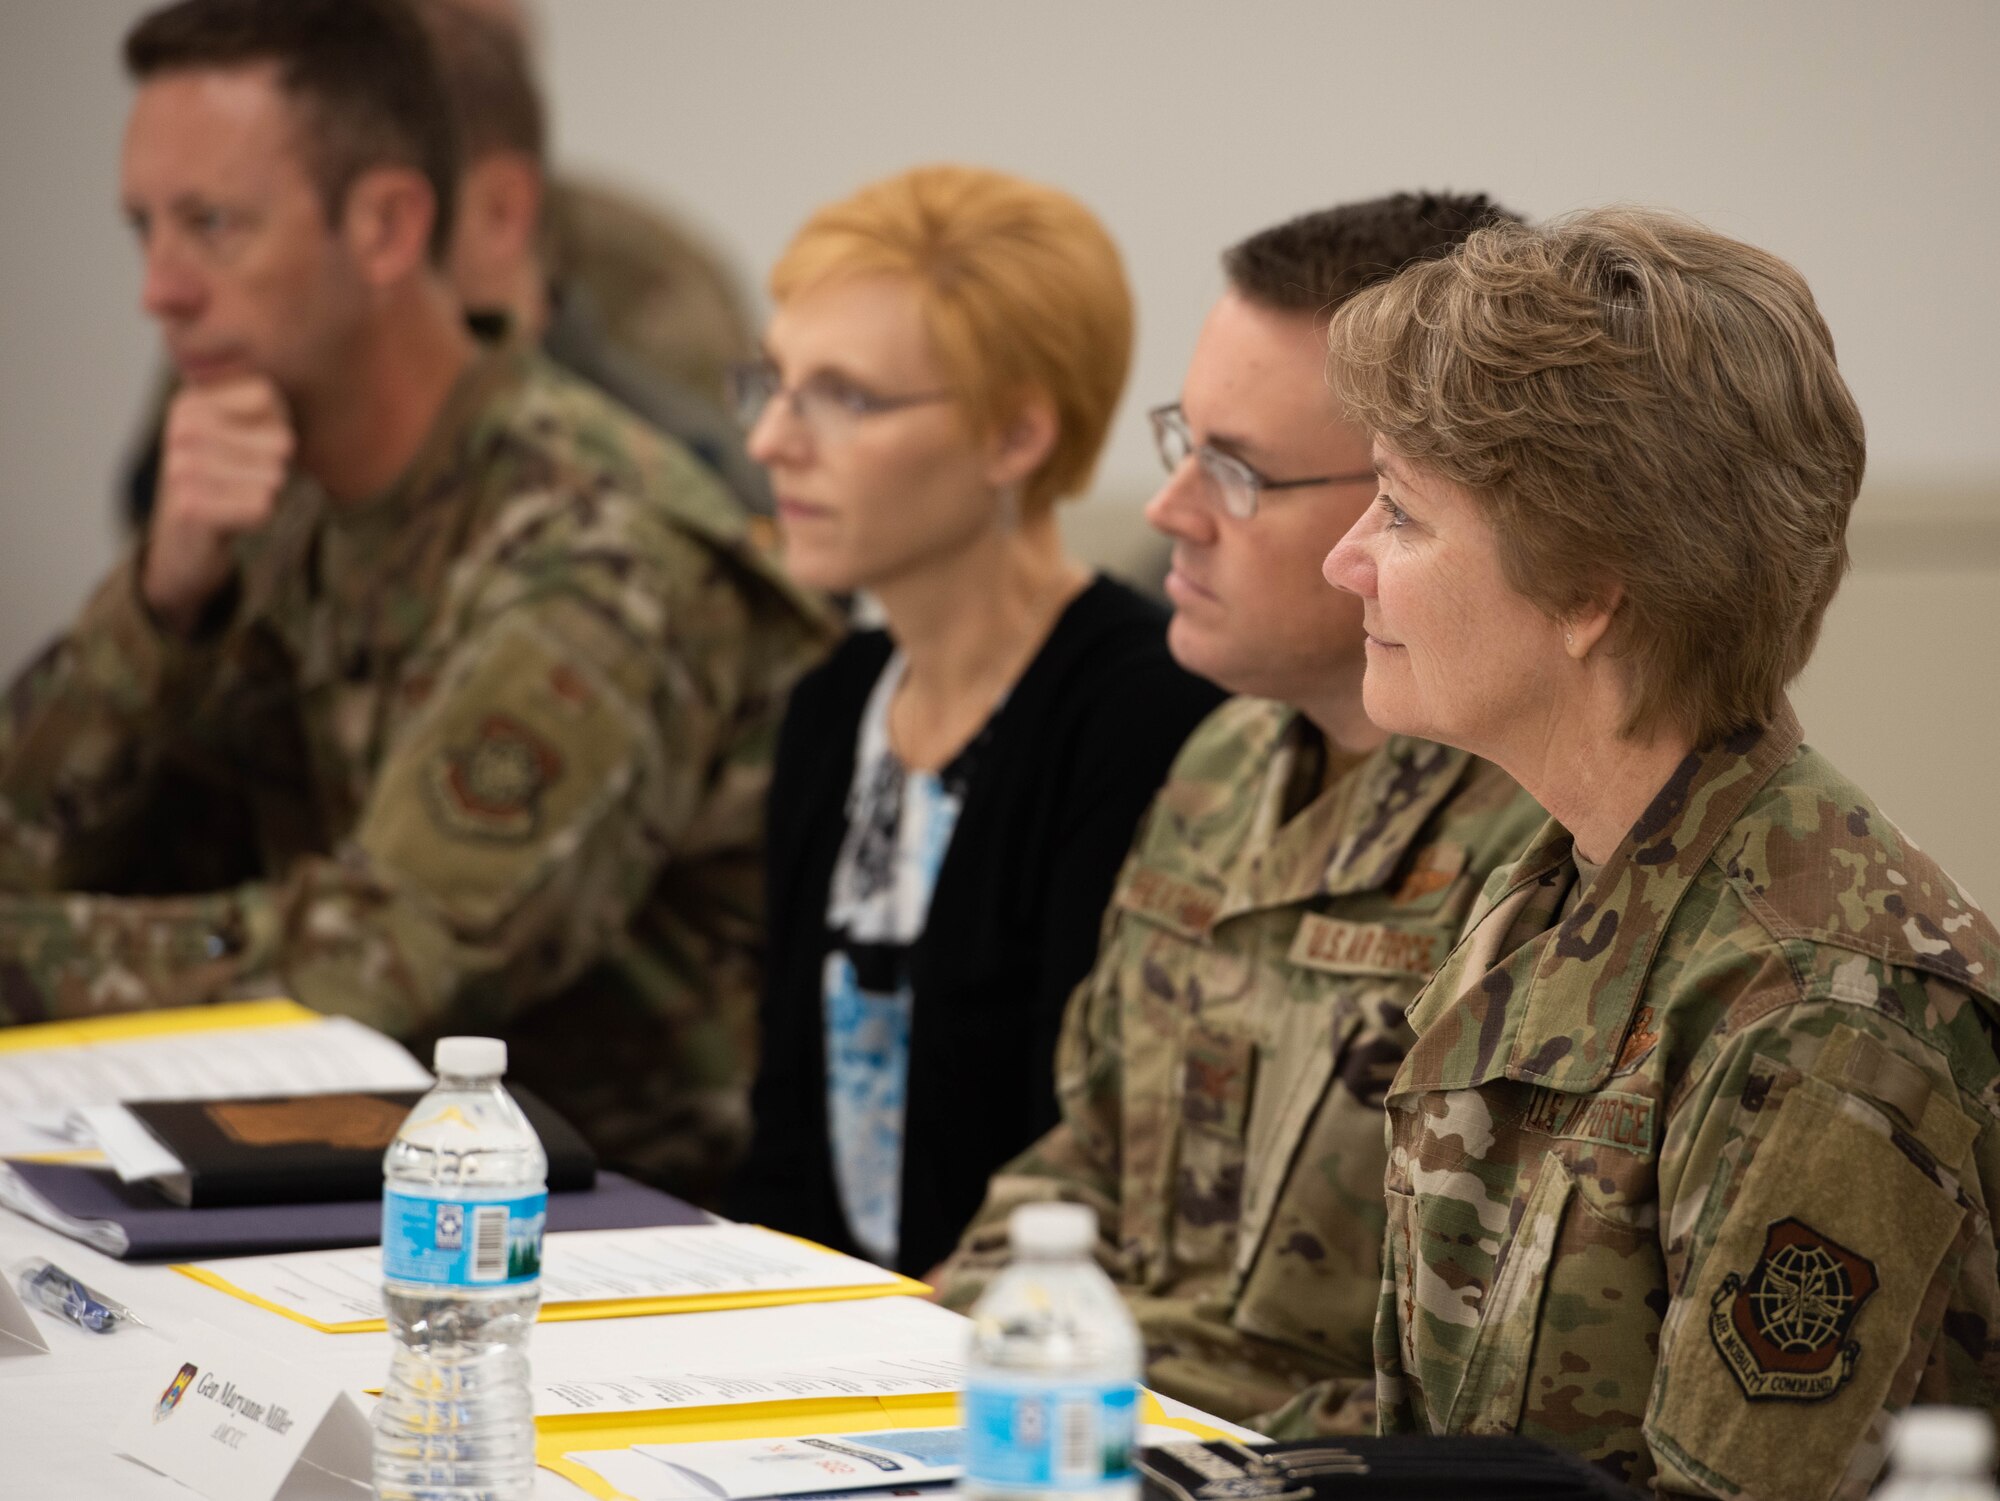 Gen. Maryanne Miller, Air Mobility Command commander, and Col. J. Scot Heathman, 375th Air Mobility Wing commander, speak with representatives from various helping agencies at Scott Air Force Base, Ill., Nov. 18, 2019.